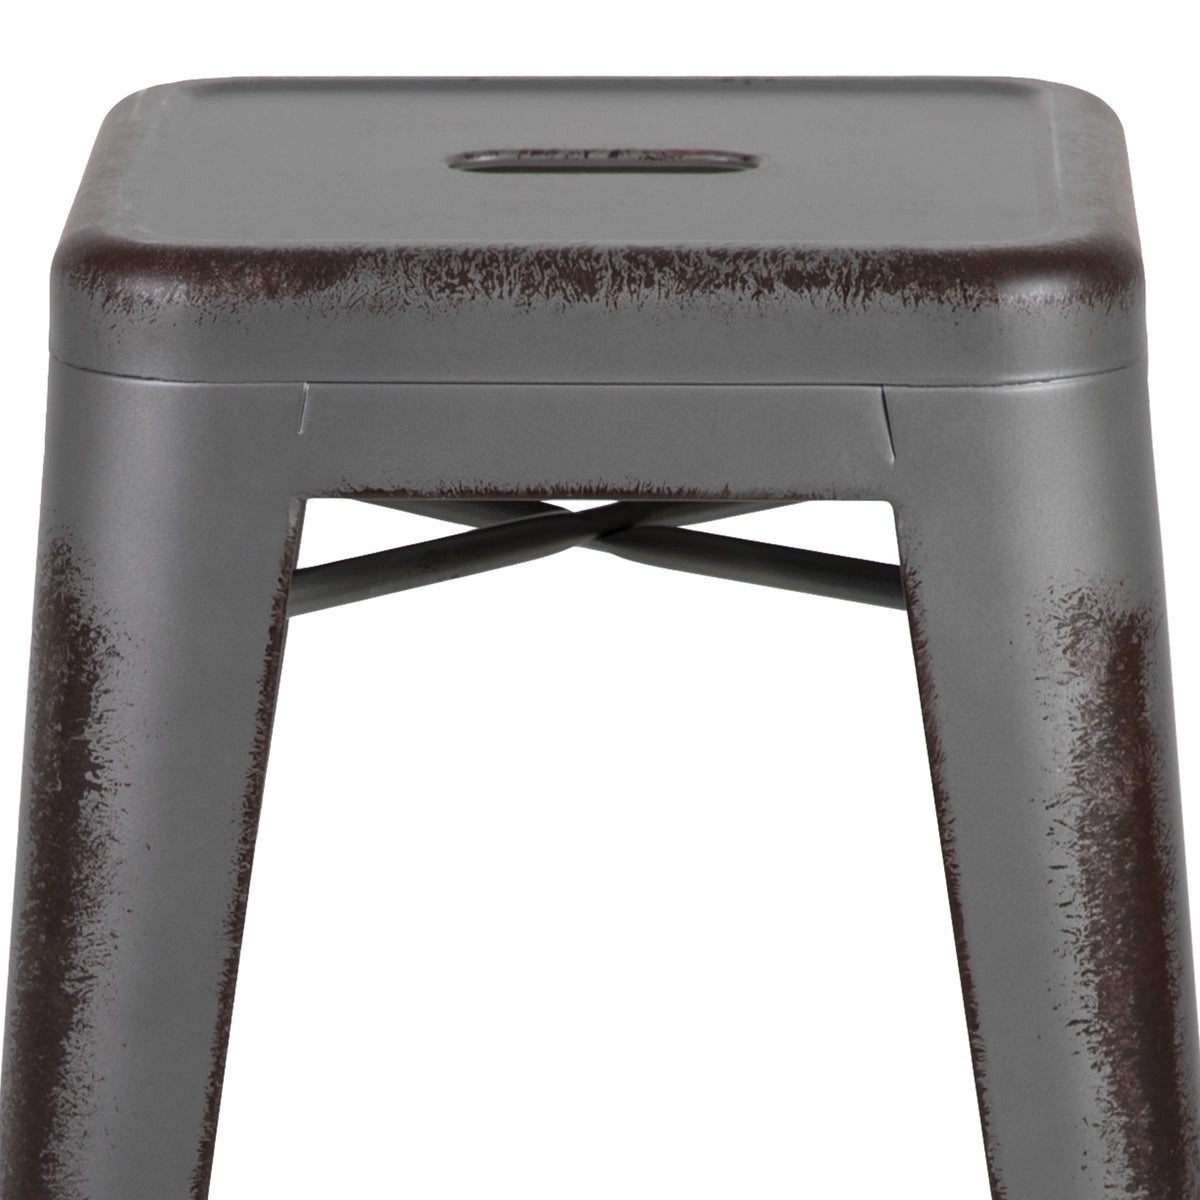 Silver Gray |#| 30inchH Backless Distressed Silver Gray Metal Indoor-Outdoor Dining Barstool